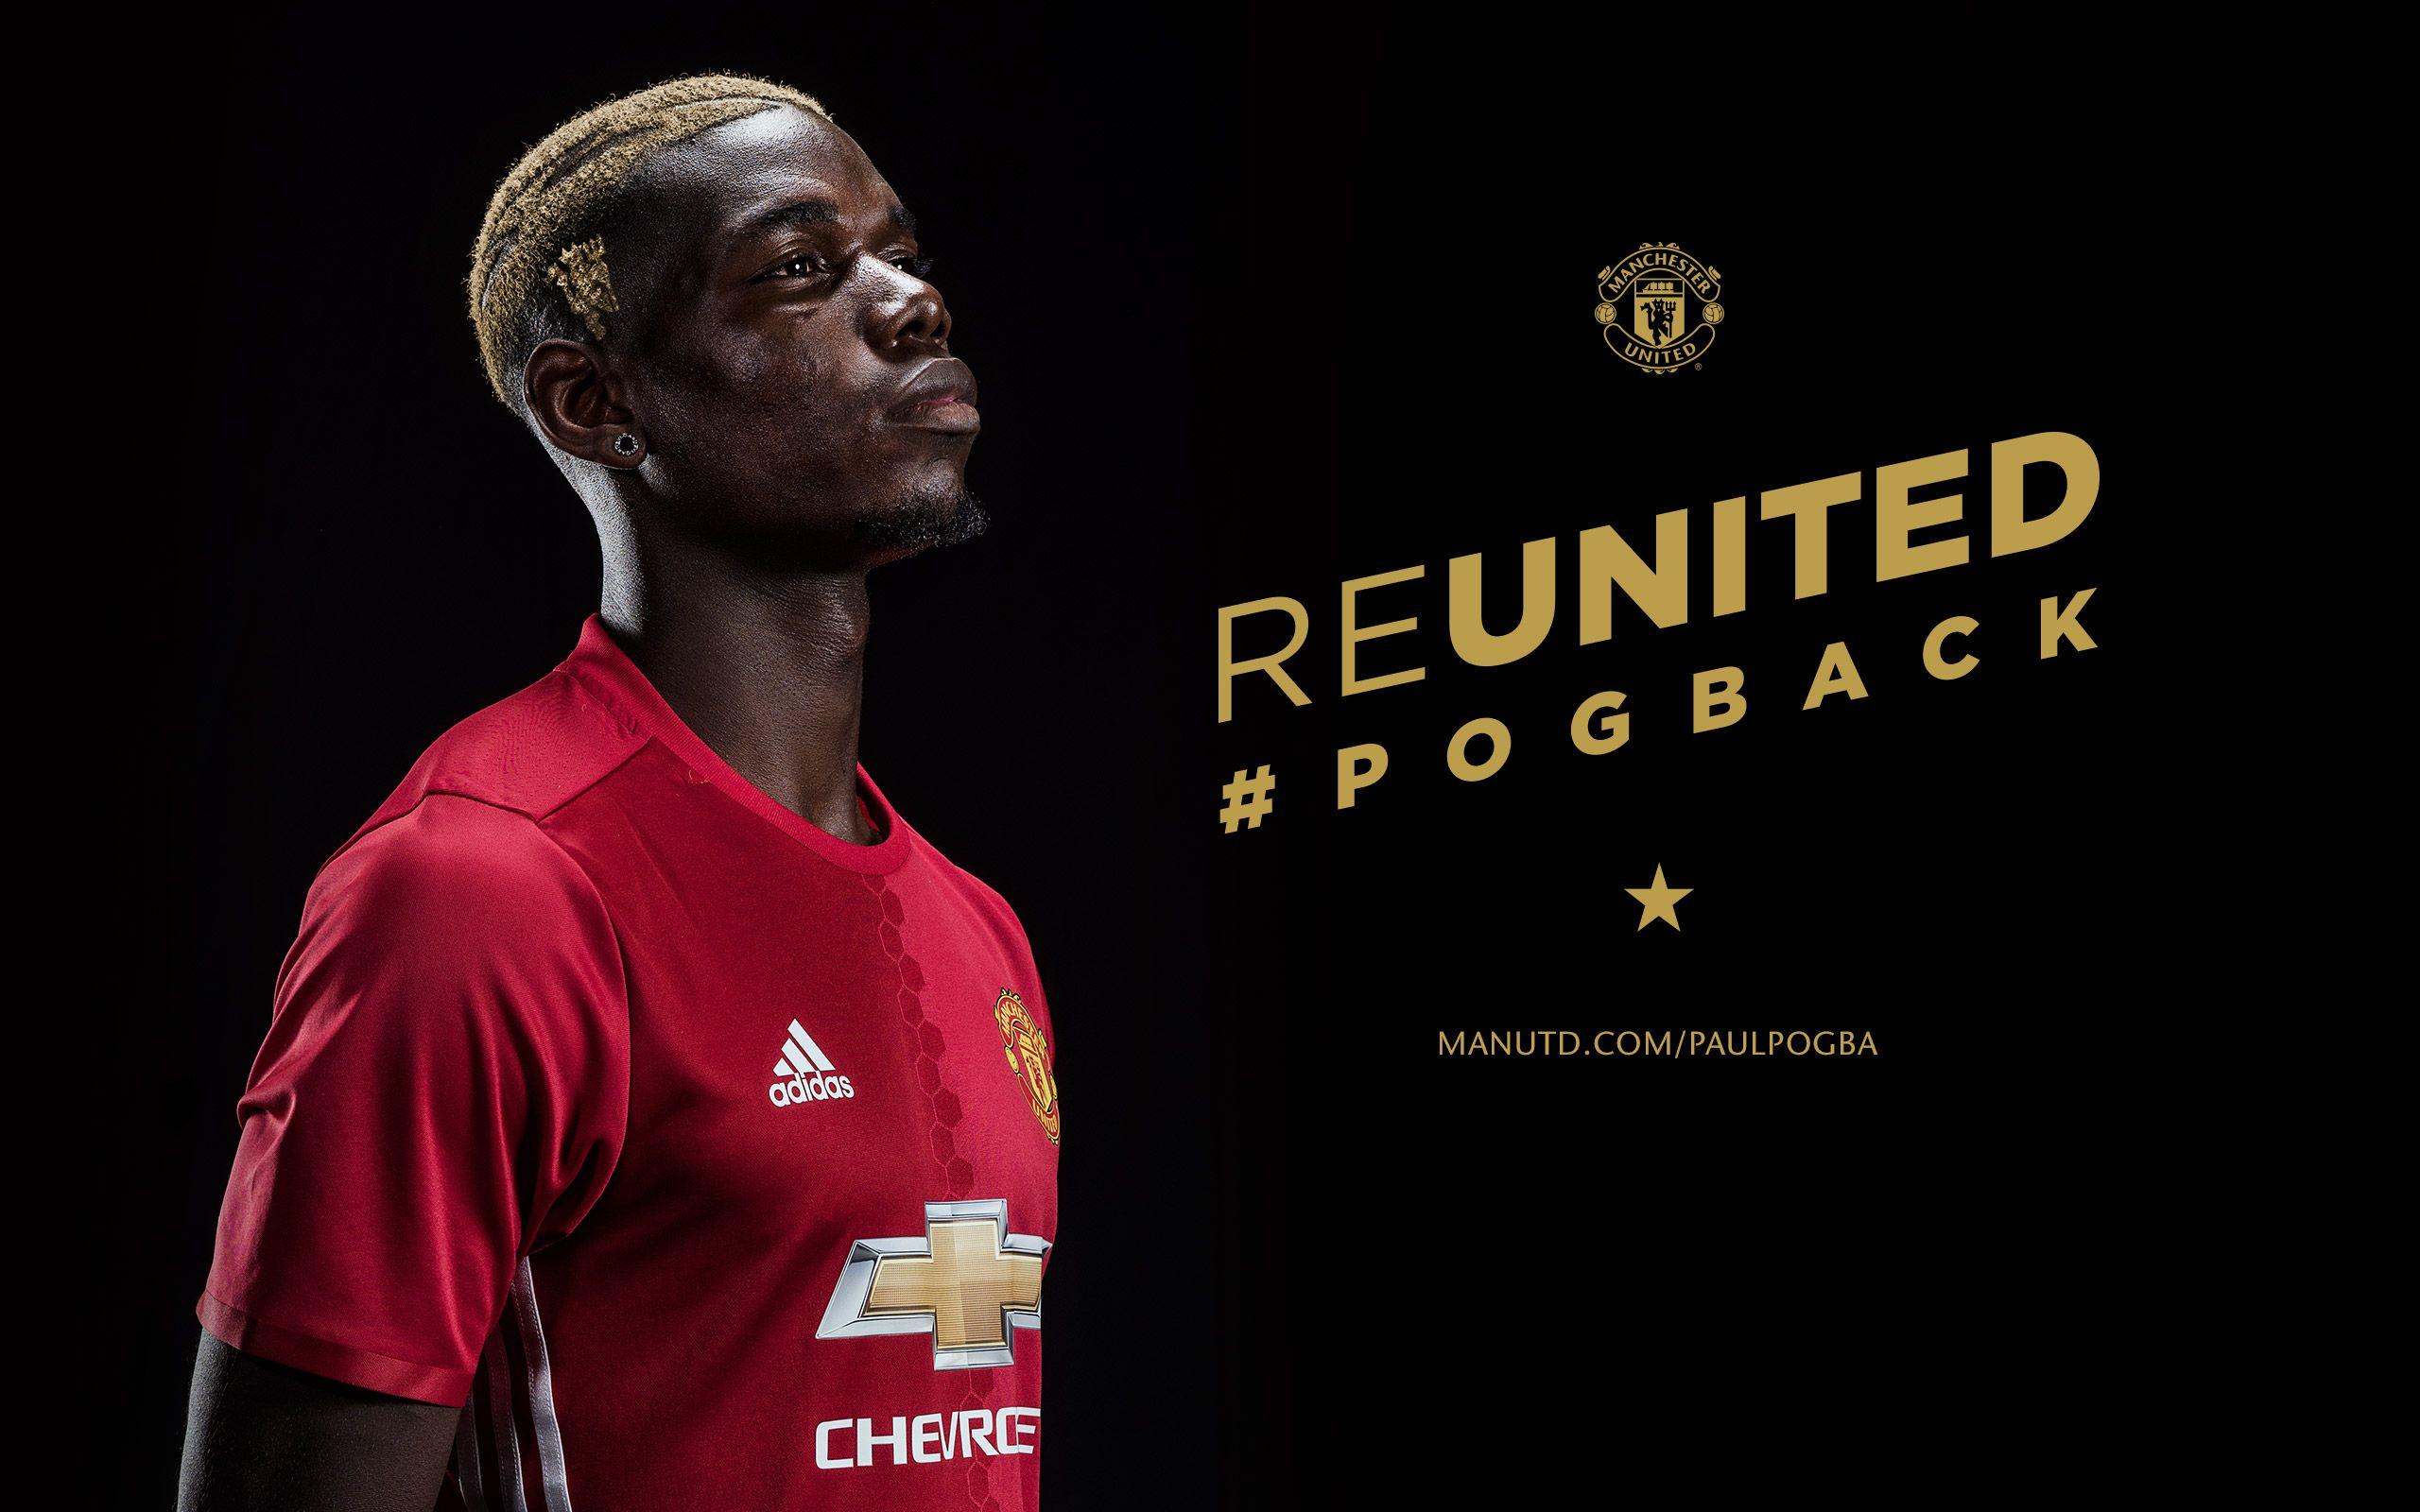 Pogba Wallpapers  Top Free Pogba Backgrounds  WallpaperAccess